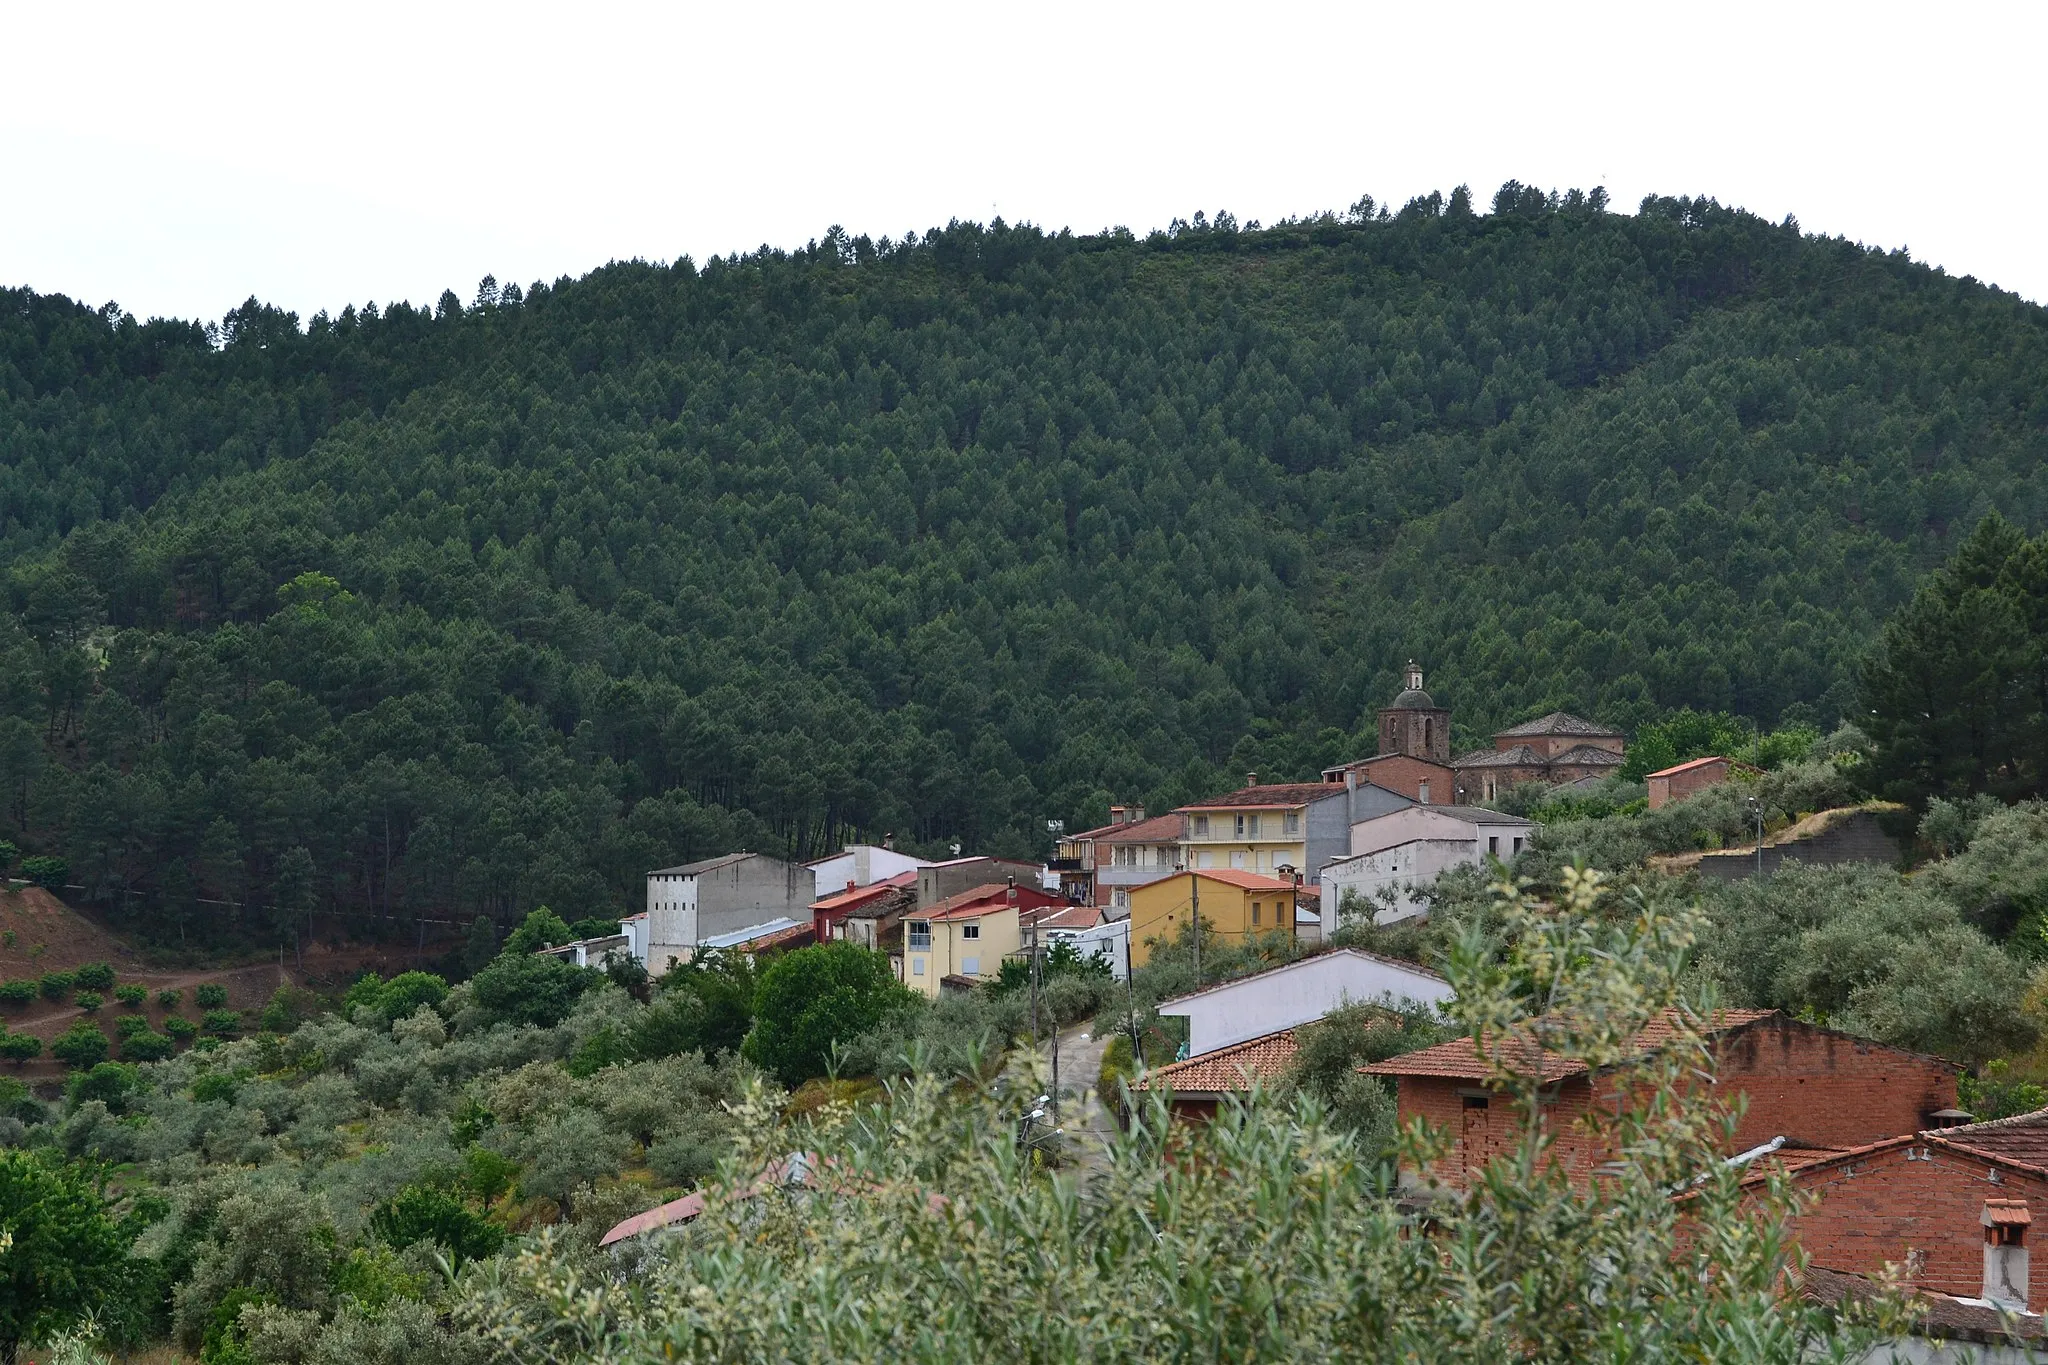 Photo showing: General view of Cambroncino, from the Barrio de Abajo. Protruding above the roofs, the tower of the Church of Santa Catalina can be seen.